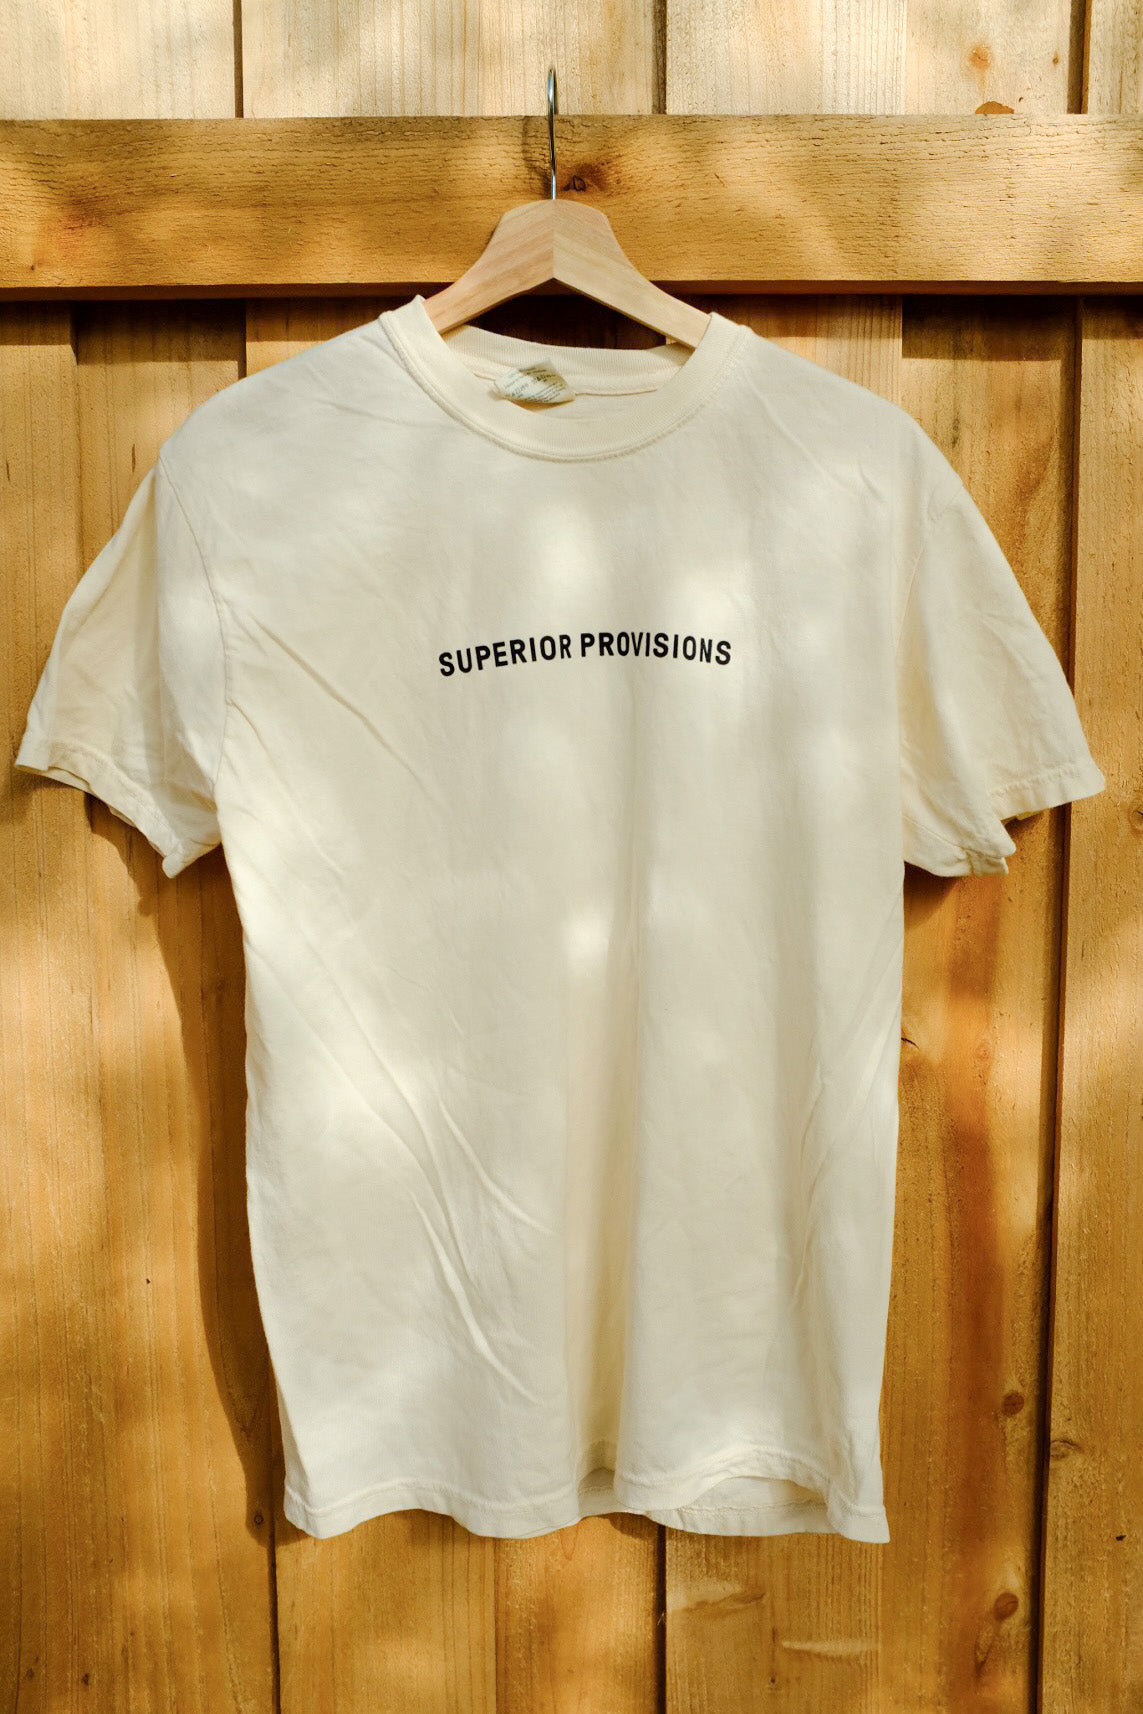 While shirt that says "Superior Provisions" in black text and is hanging on a wooden hanger, in front of a wooden fence.